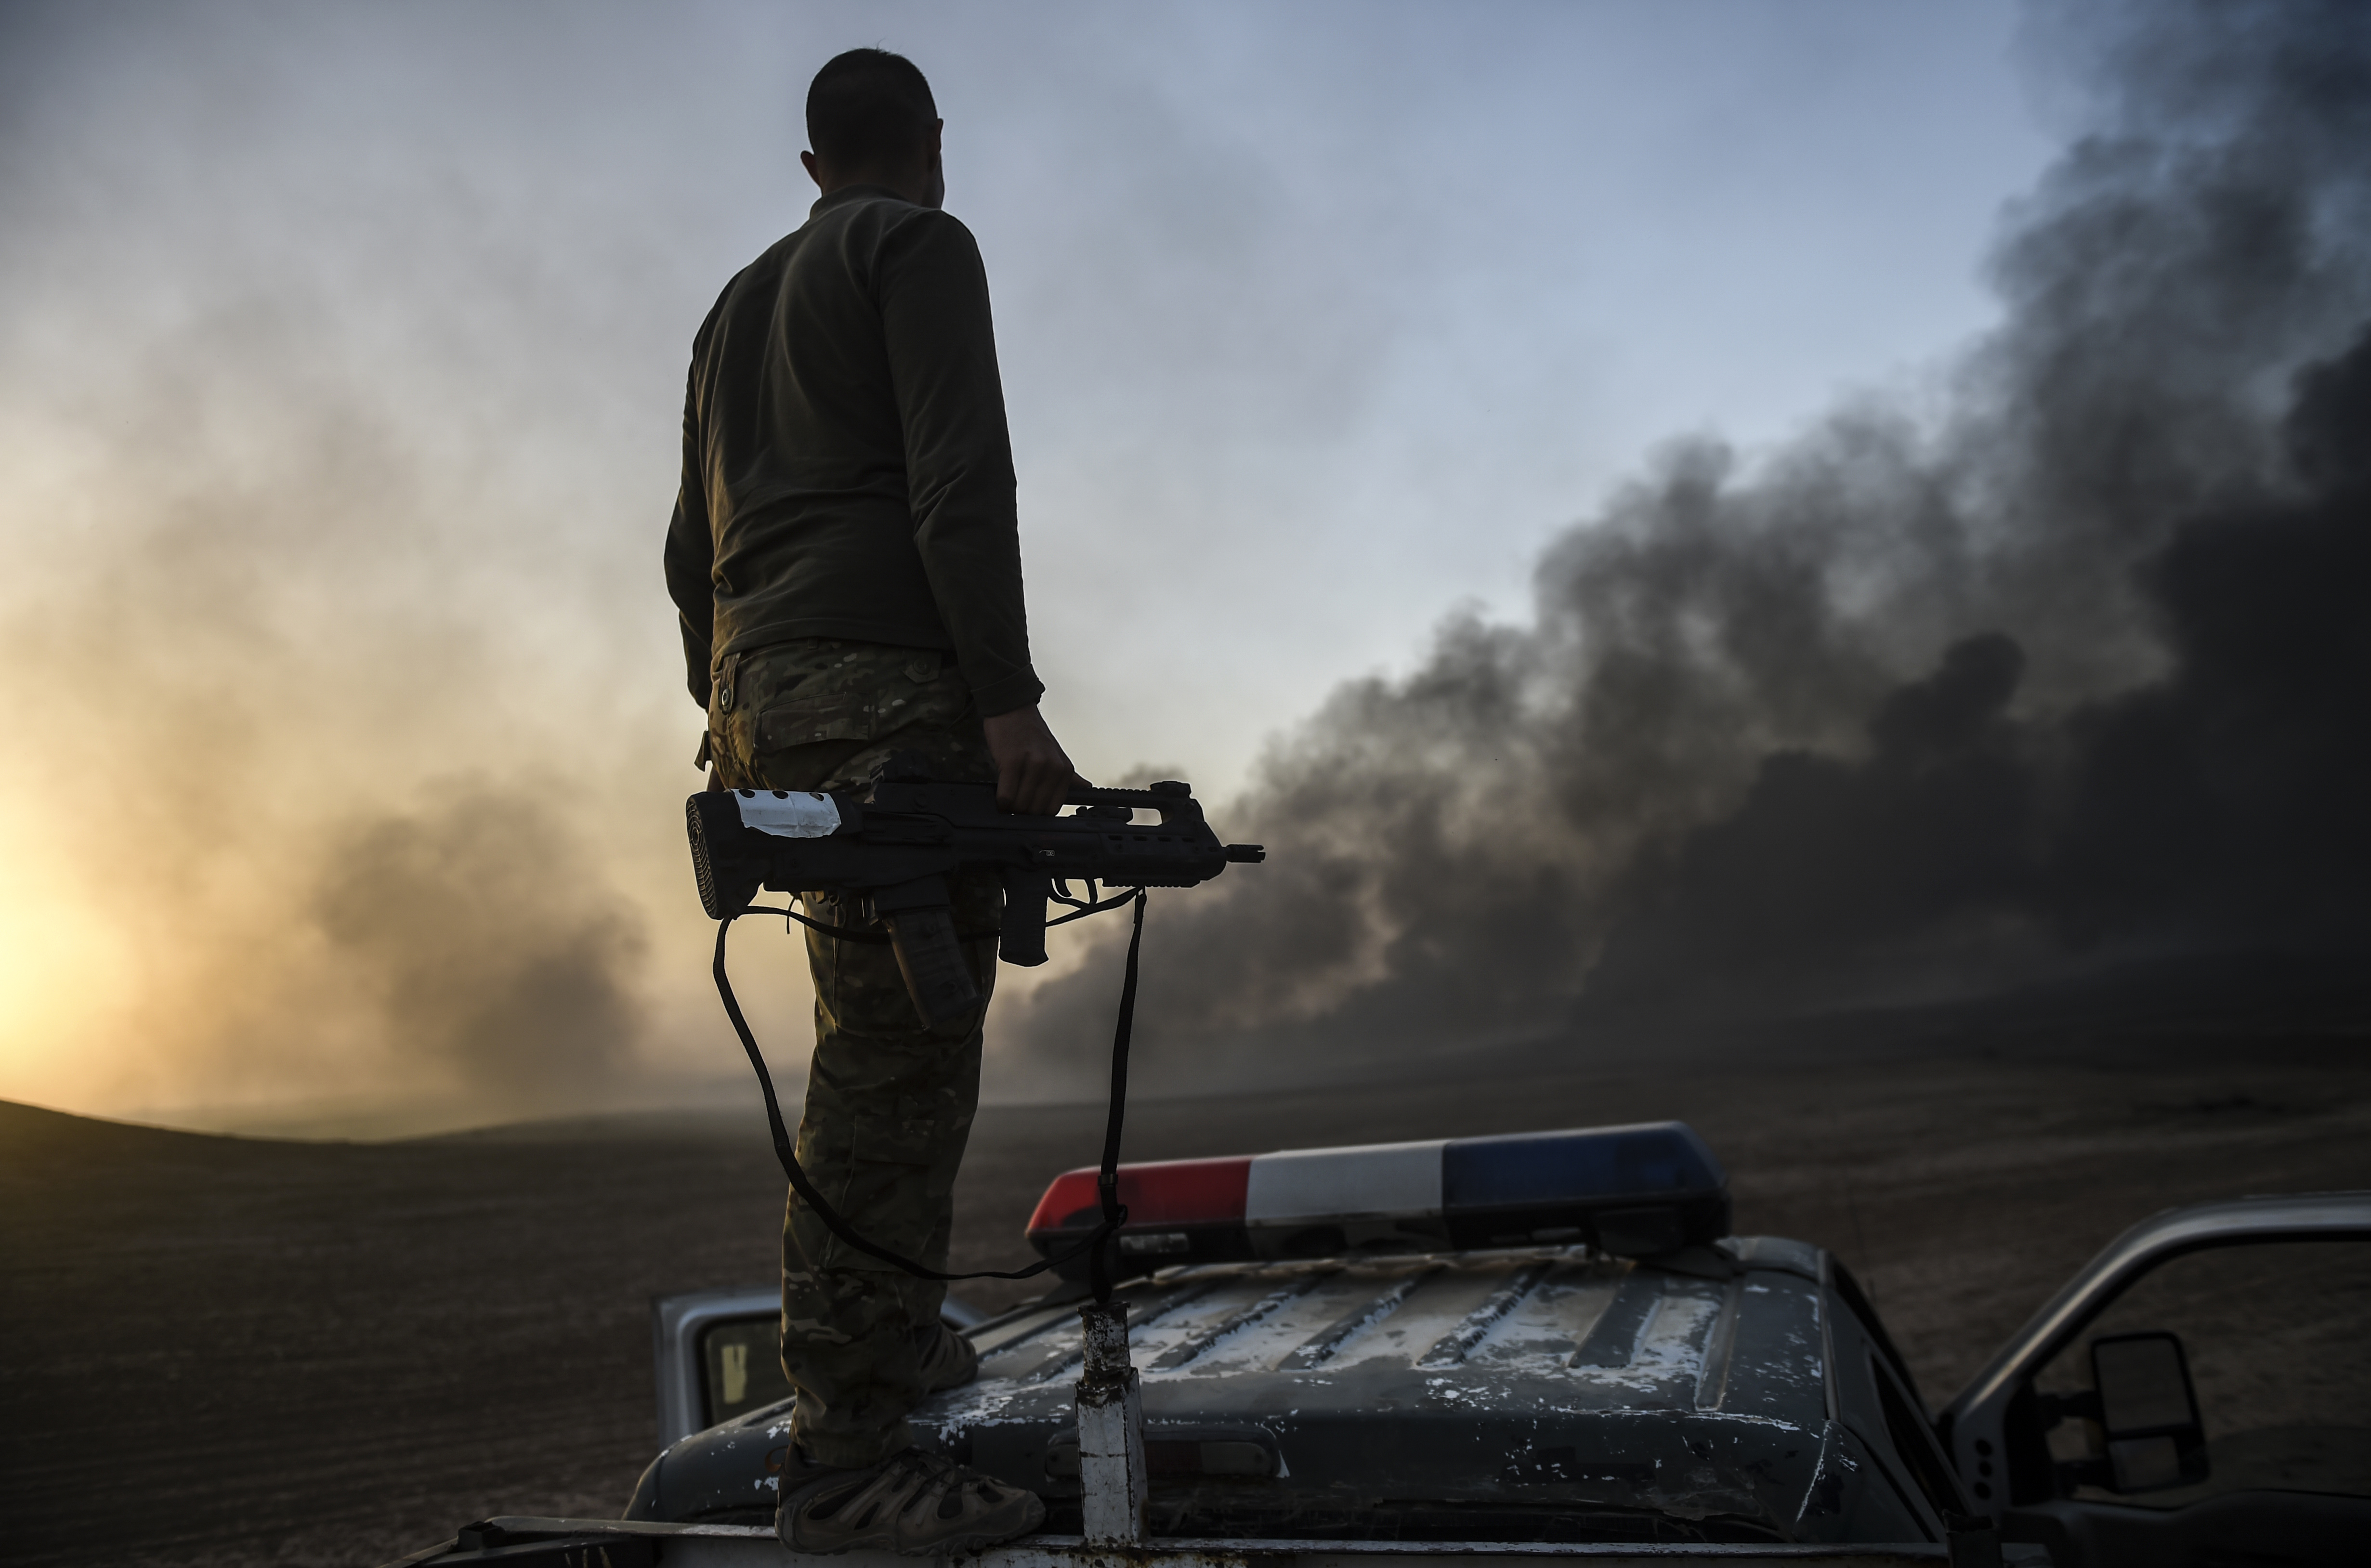 A member of the Iraqi government forces takes a position  on top of a vehicle as smoke rises on the outskirts of the Qayyarah area, some 60 kilometres (35 miles) south of Mosul, on October 20, 2016, during an operation against Islamic State (IS) group jihadists to retake the main hub city. In the biggest Iraqi military operation in years, forces have retaken dozens of villages, mostly south and east of Mosul, and are planning multiple assaults for October 20. / AFP PHOTO / BULENT KILIC